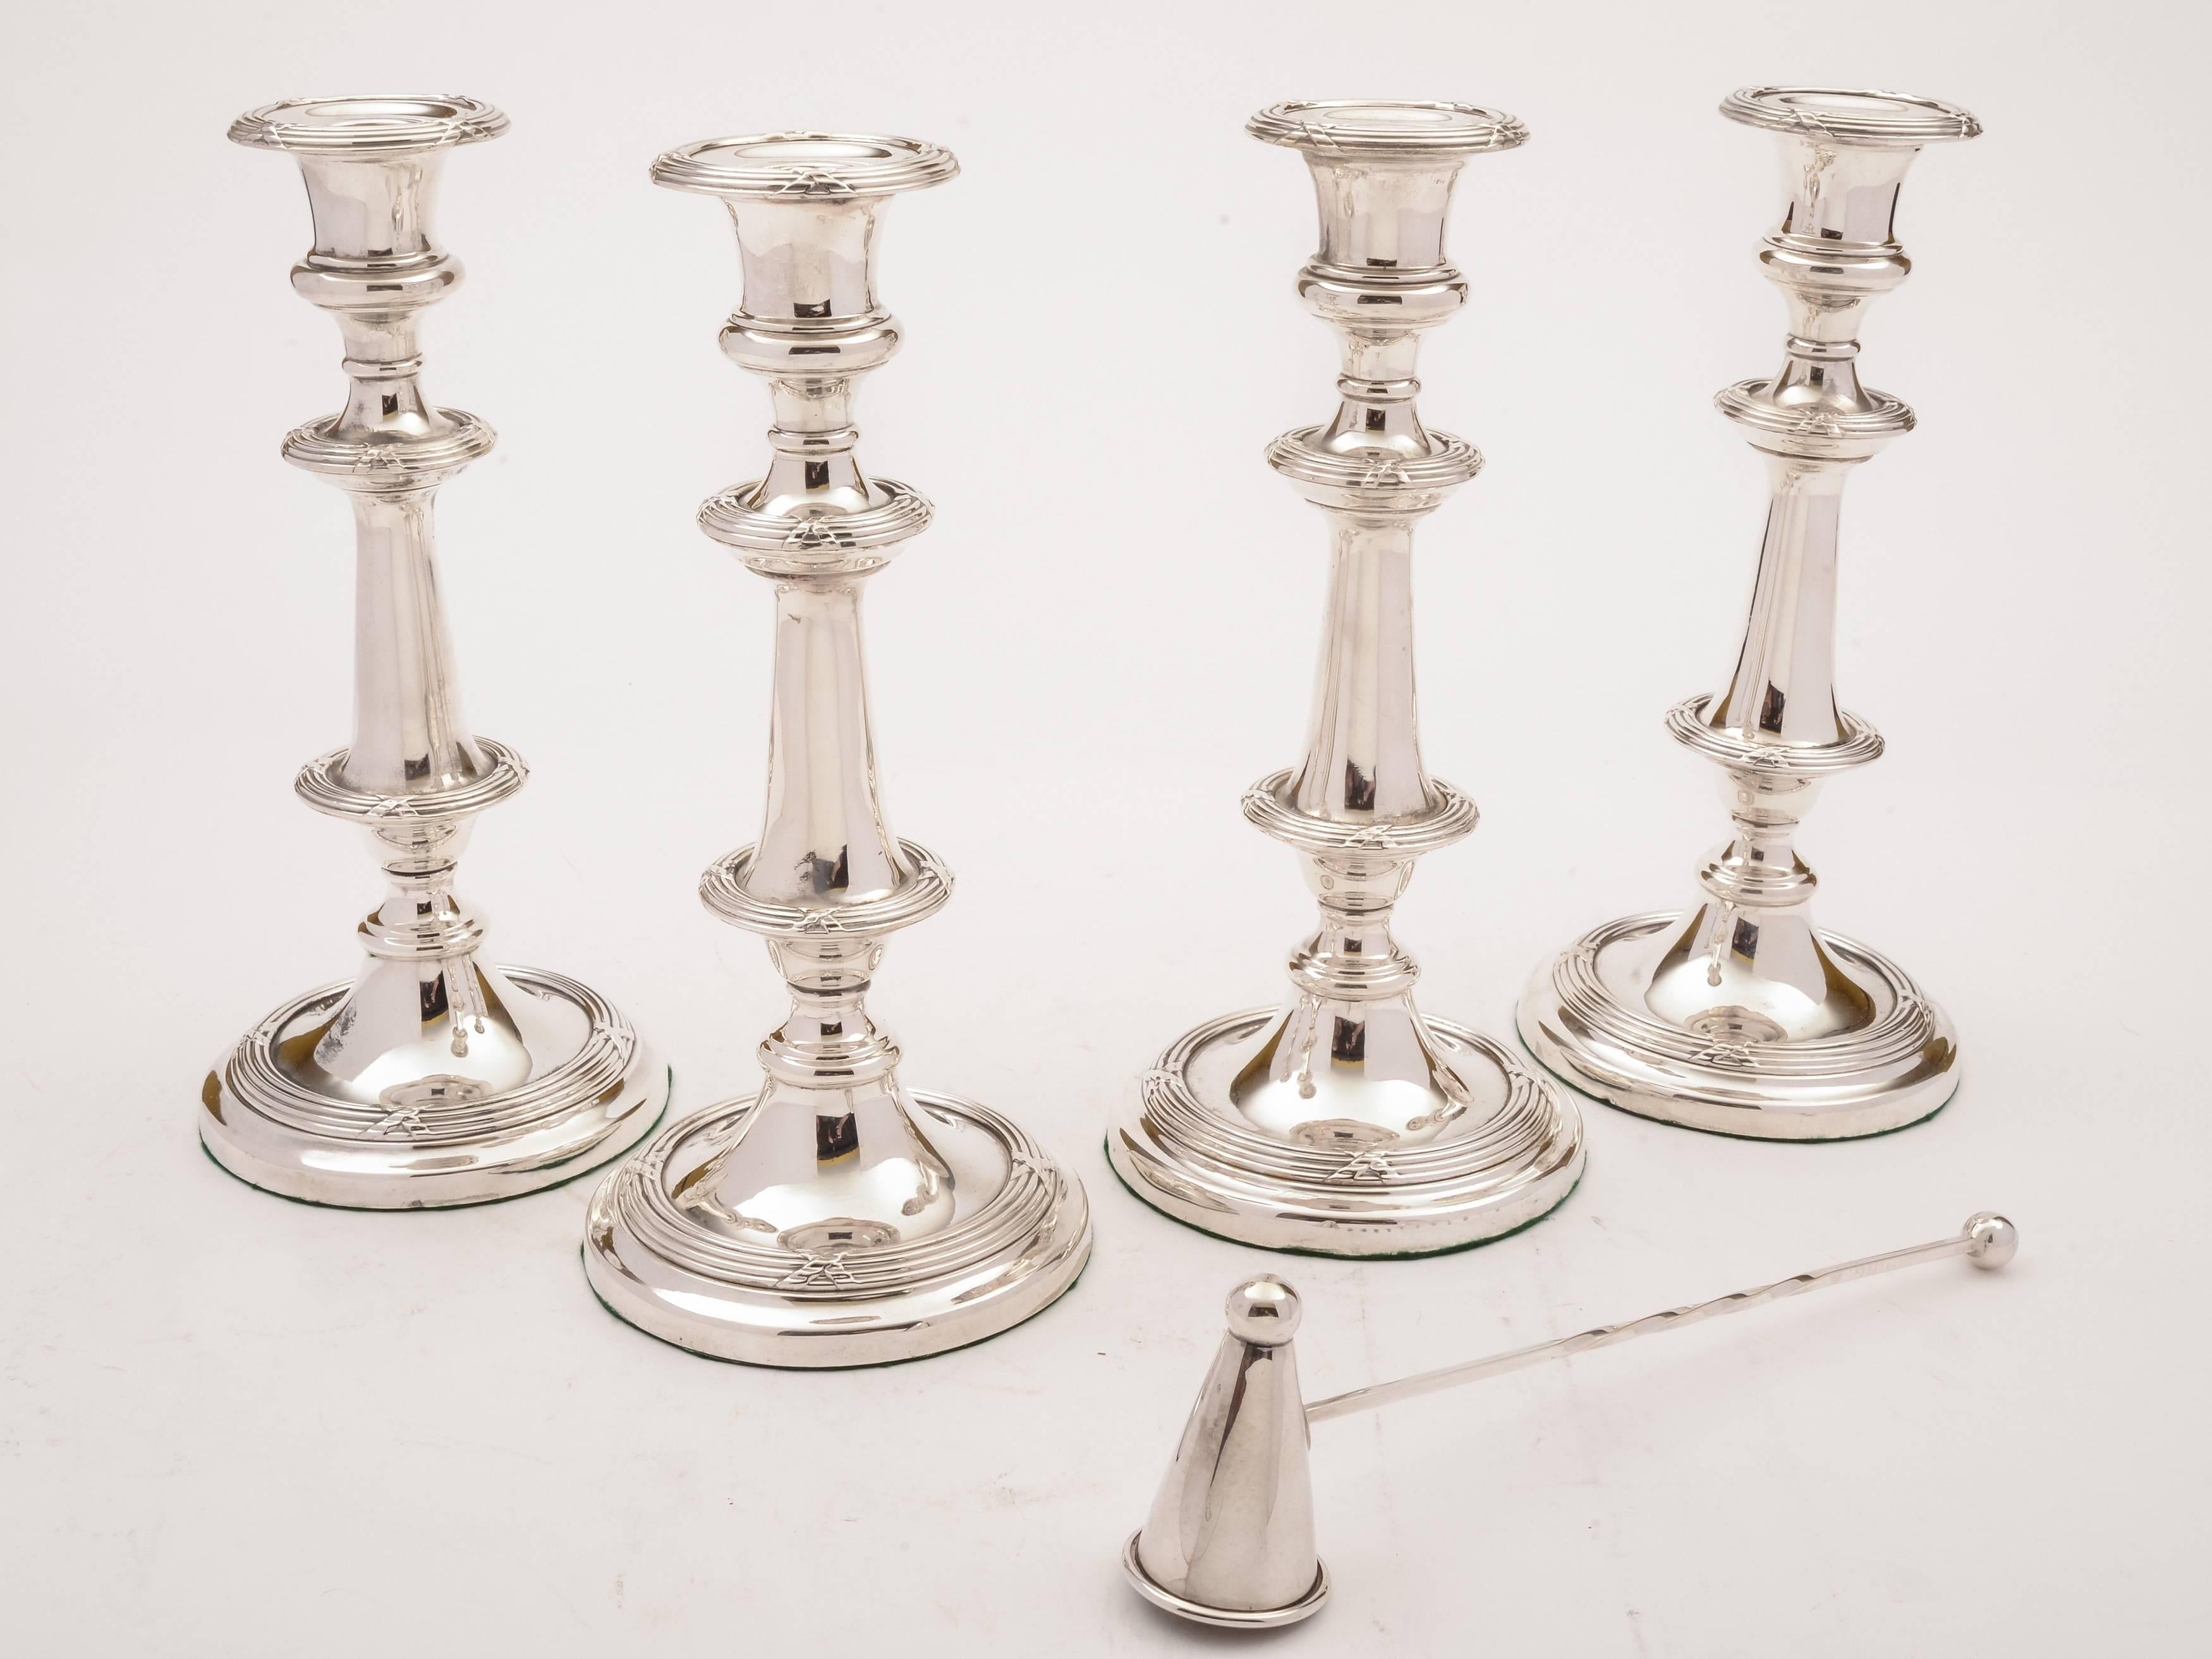 A stunning set of four English Victorian silver plated matching candlesticks with embossed decoration, detachable drip-trays for ease of cleaning and candle snuffer. circa 1890.



Measurements:
Height: 9